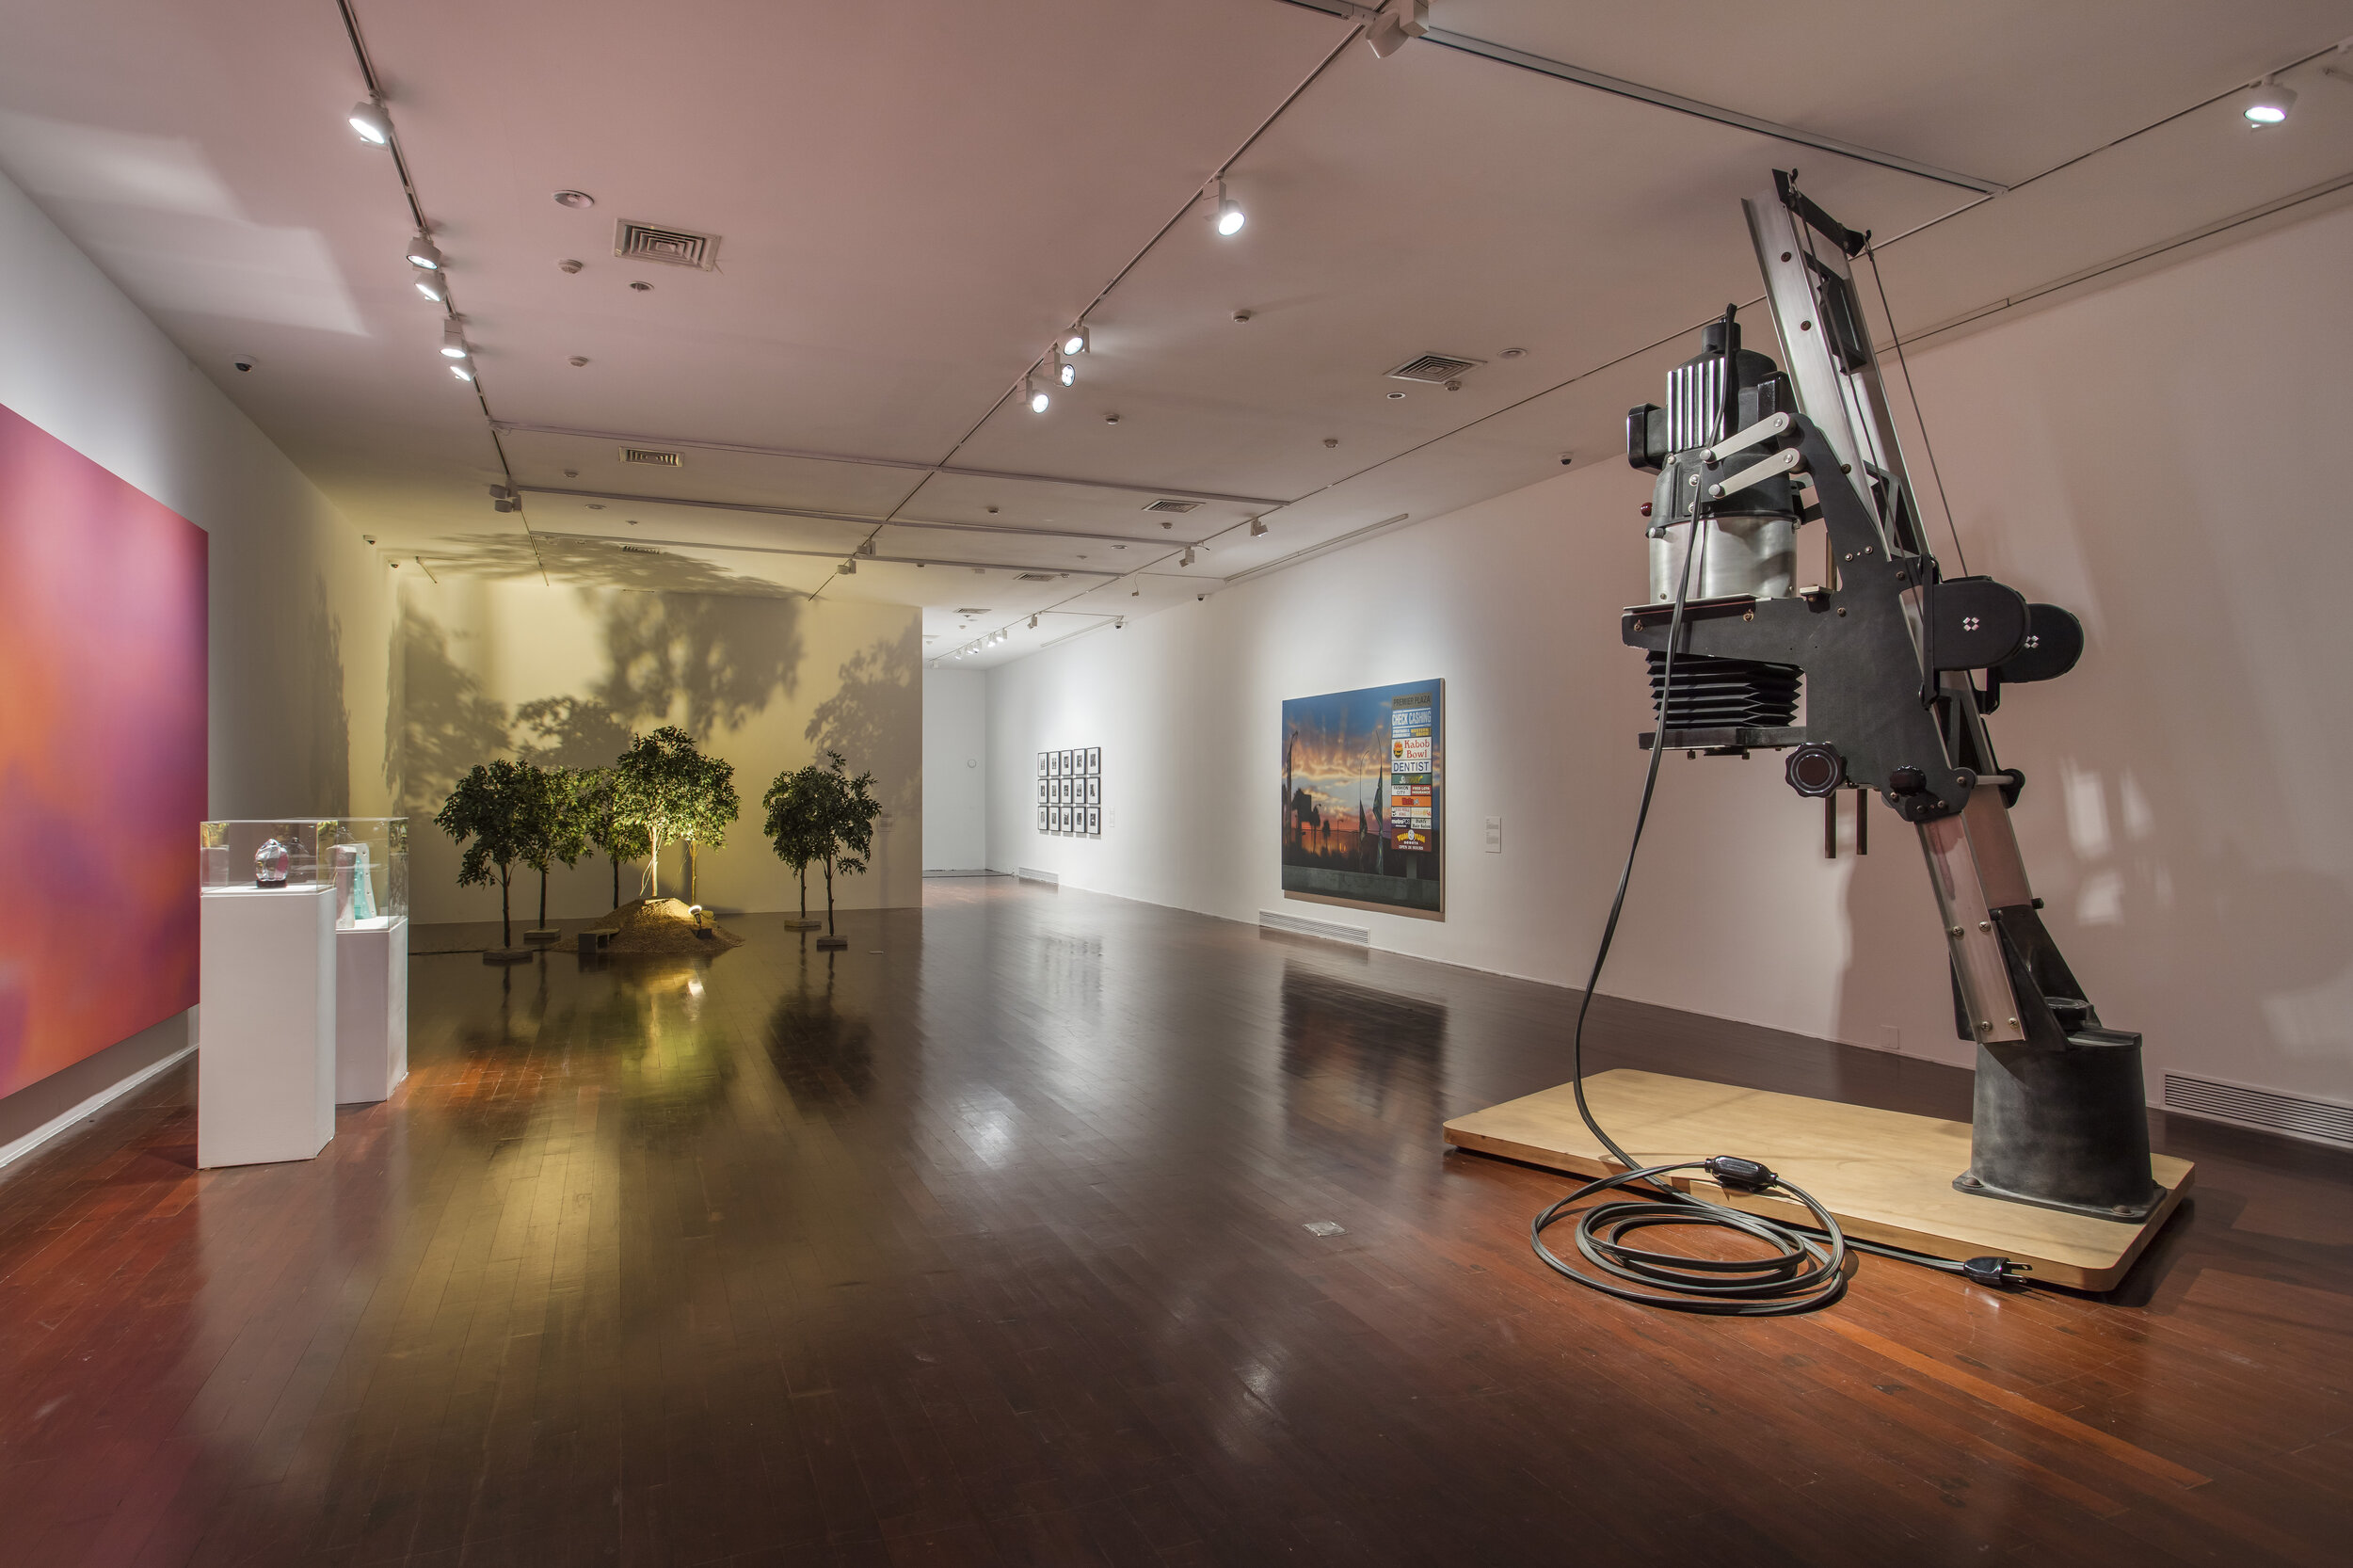  In Production: Art and the Studio System, 2019. Installation view. Image courtesy of Yuz Museum Shanghai. Photo by JJYPhoto 